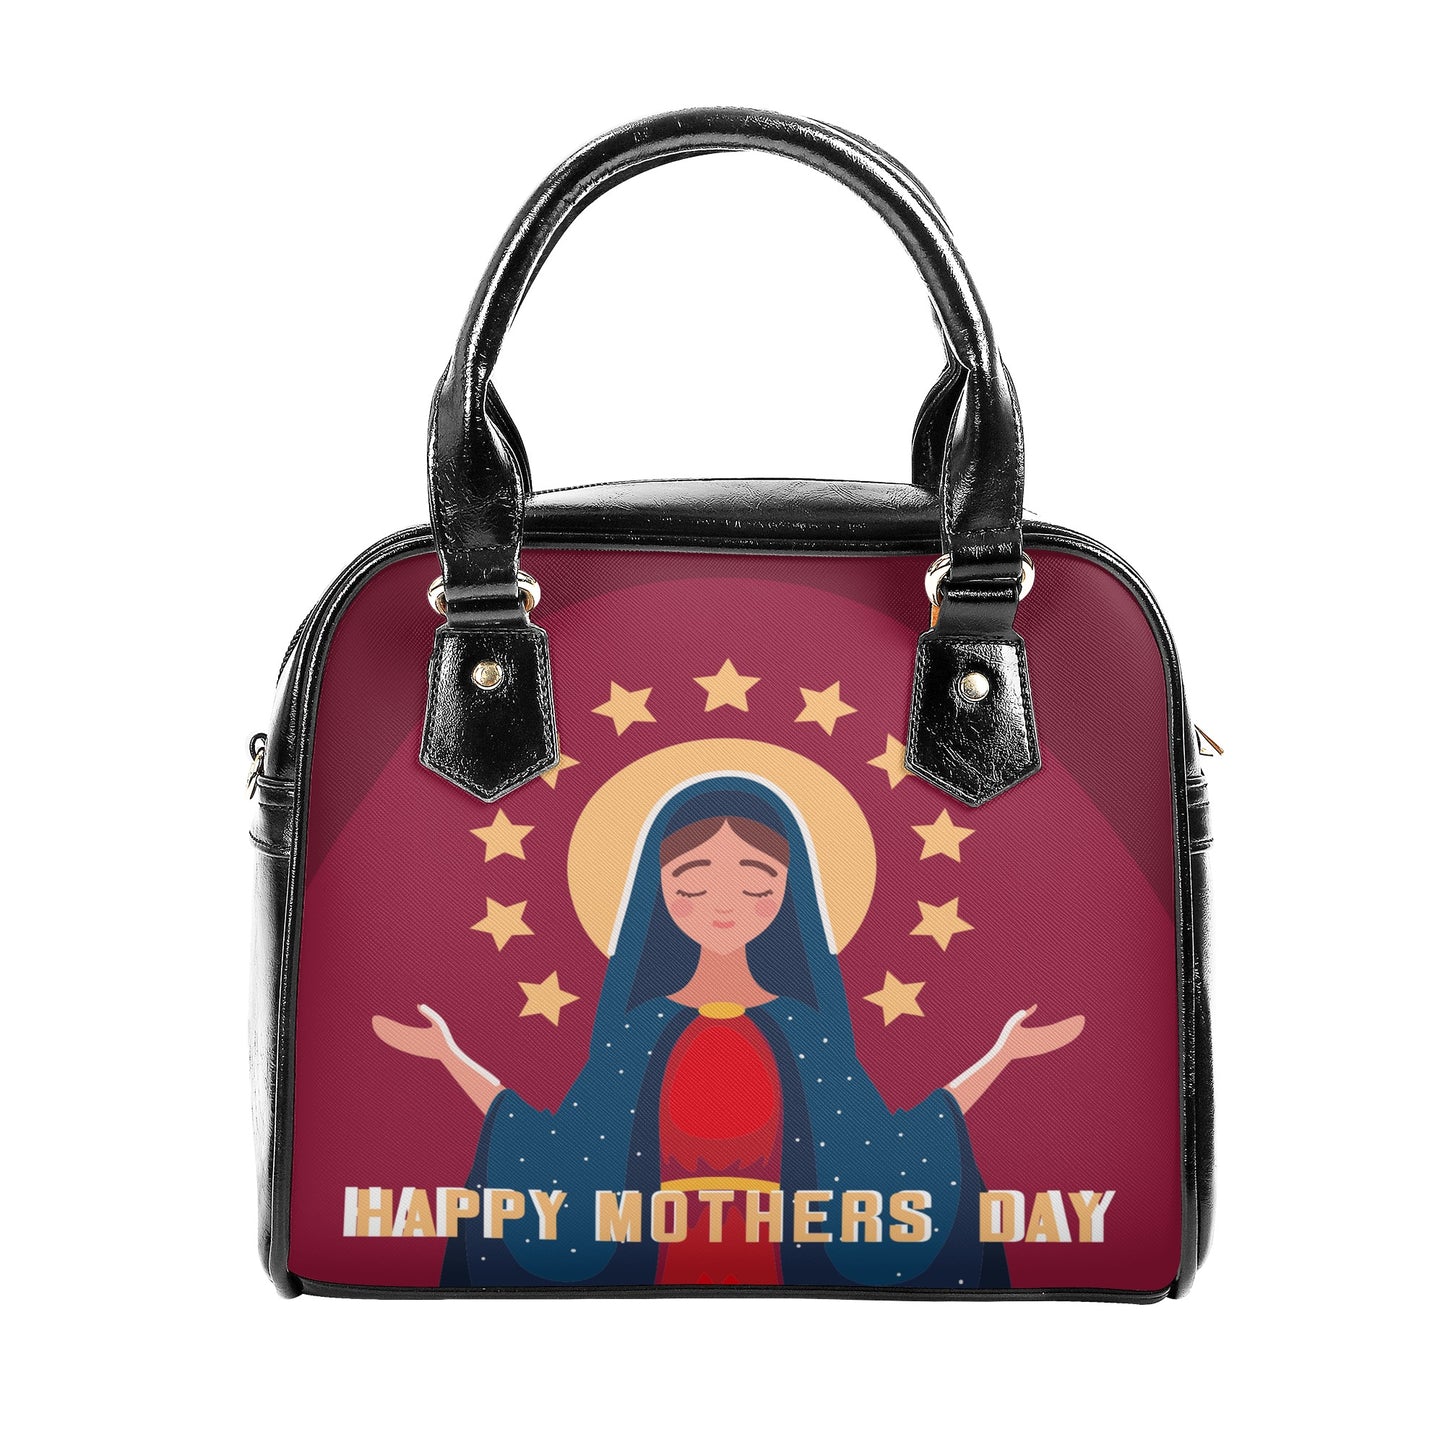 Happy Mothers Day to the Saint that Gave Life PU Shoulder Handbag